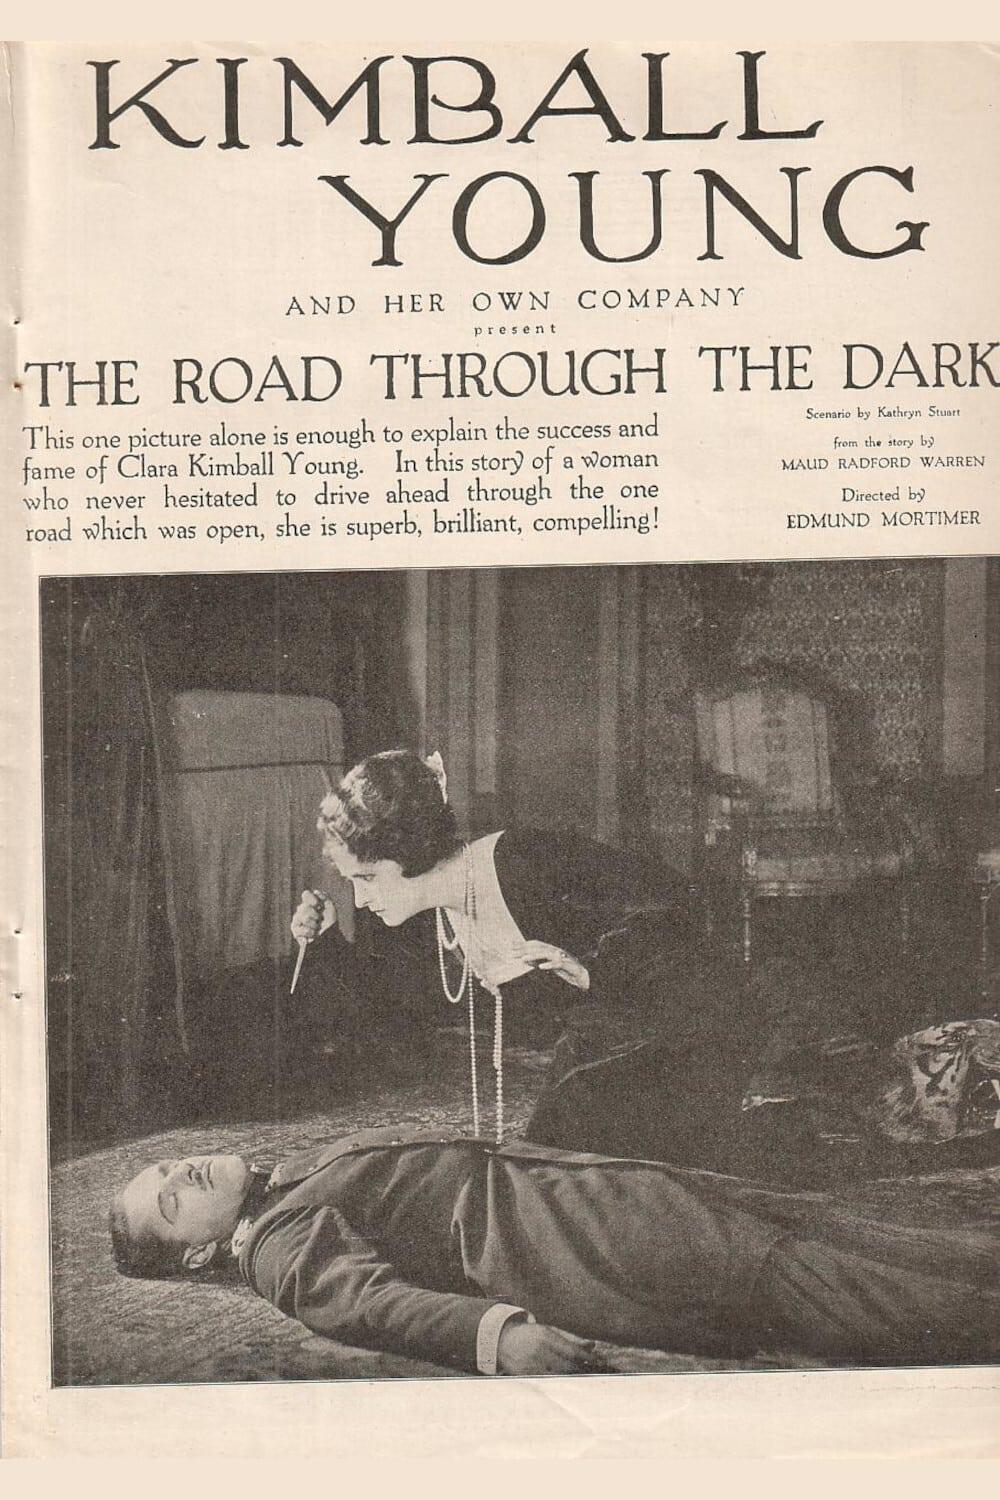 The Road Through the Dark poster